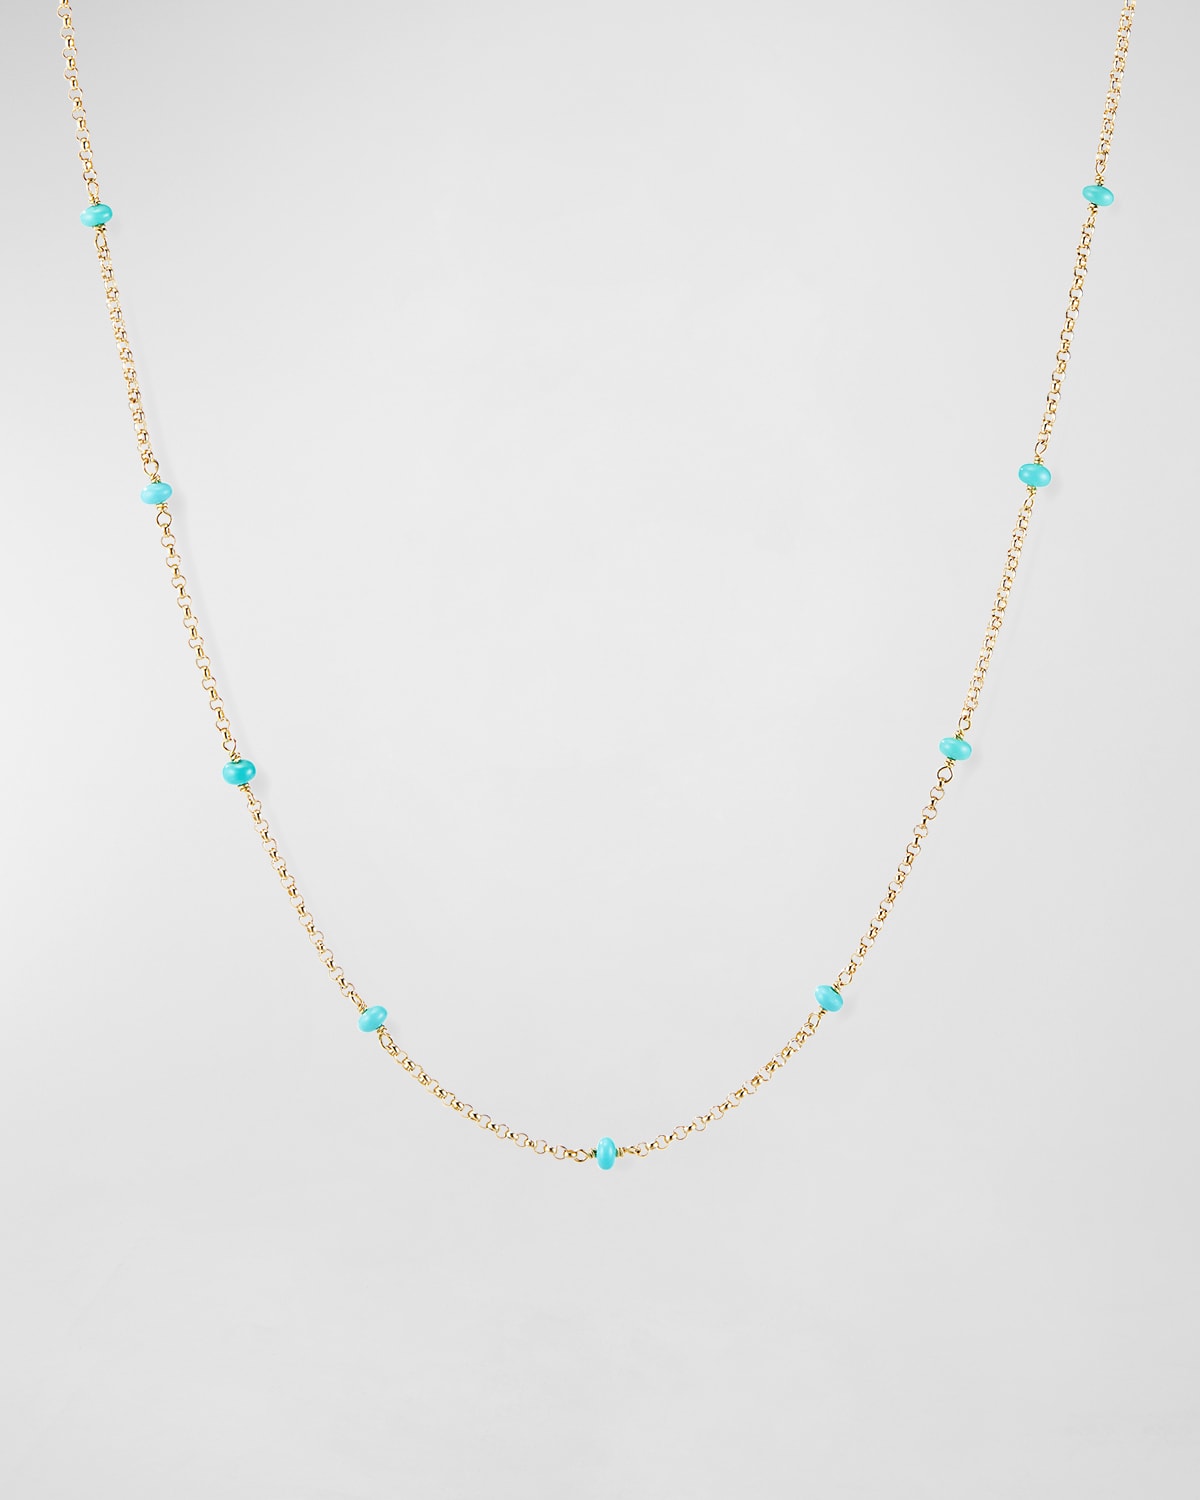 Cable Collectibles Turquoise Necklace, 36"L